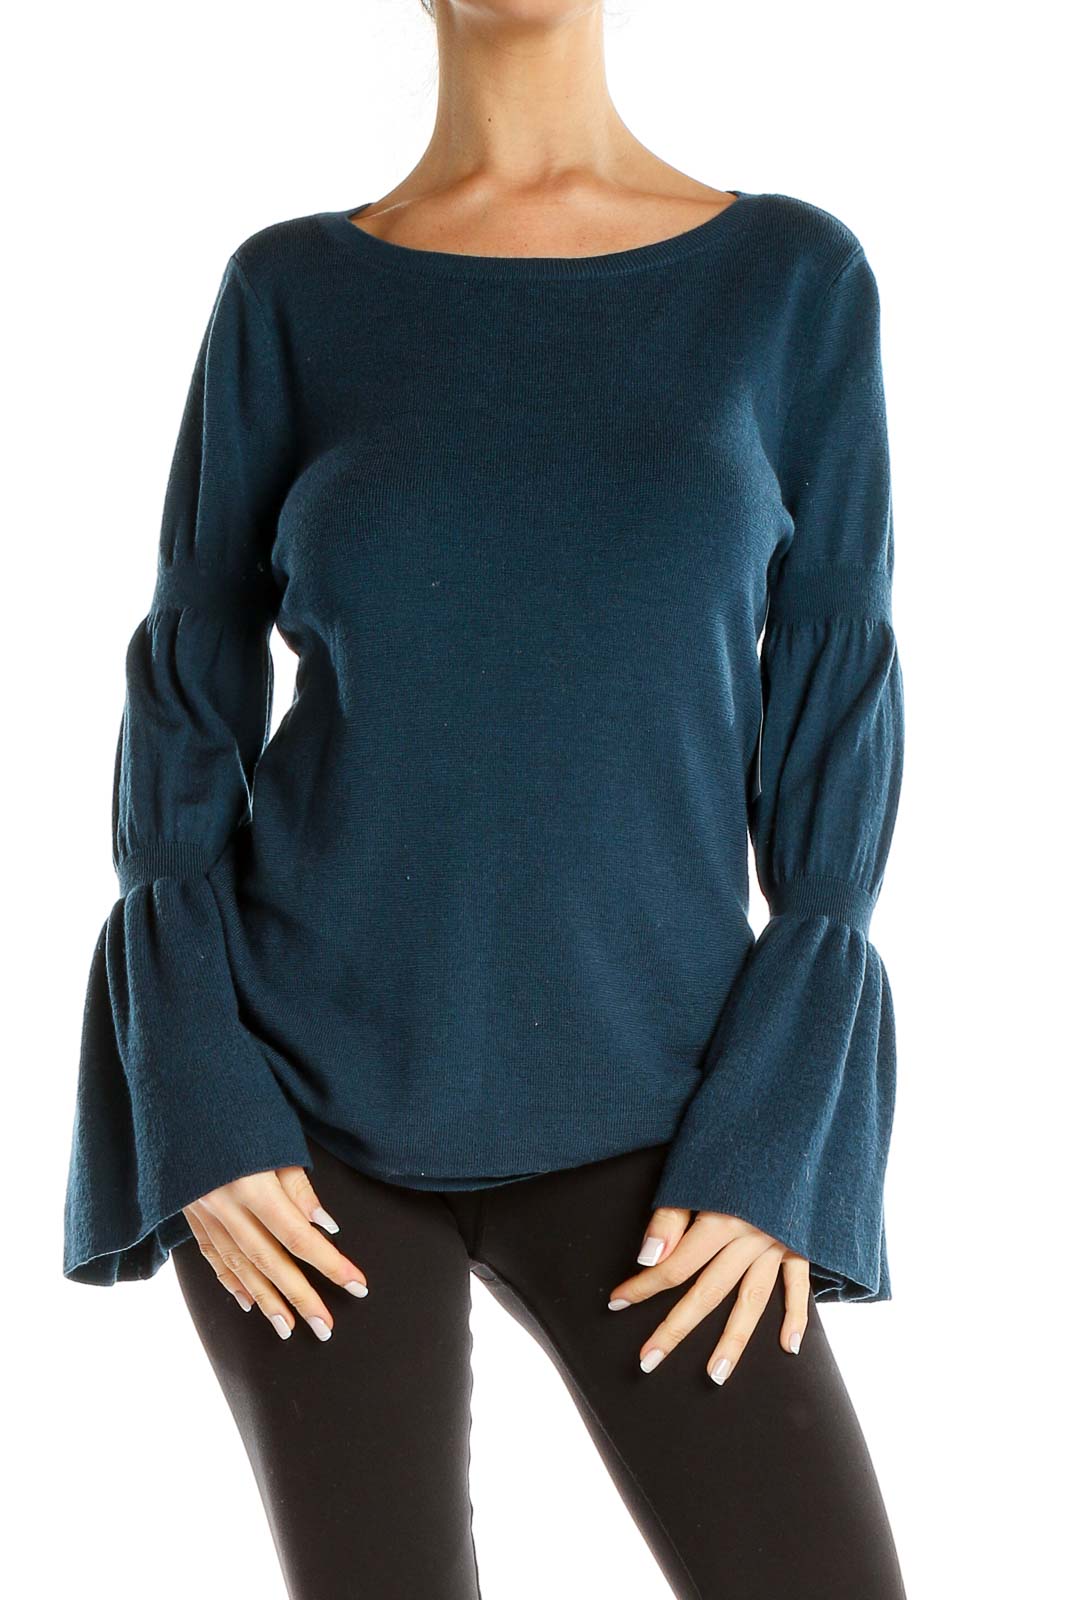 Blue Cinched Arm Casual Top Front